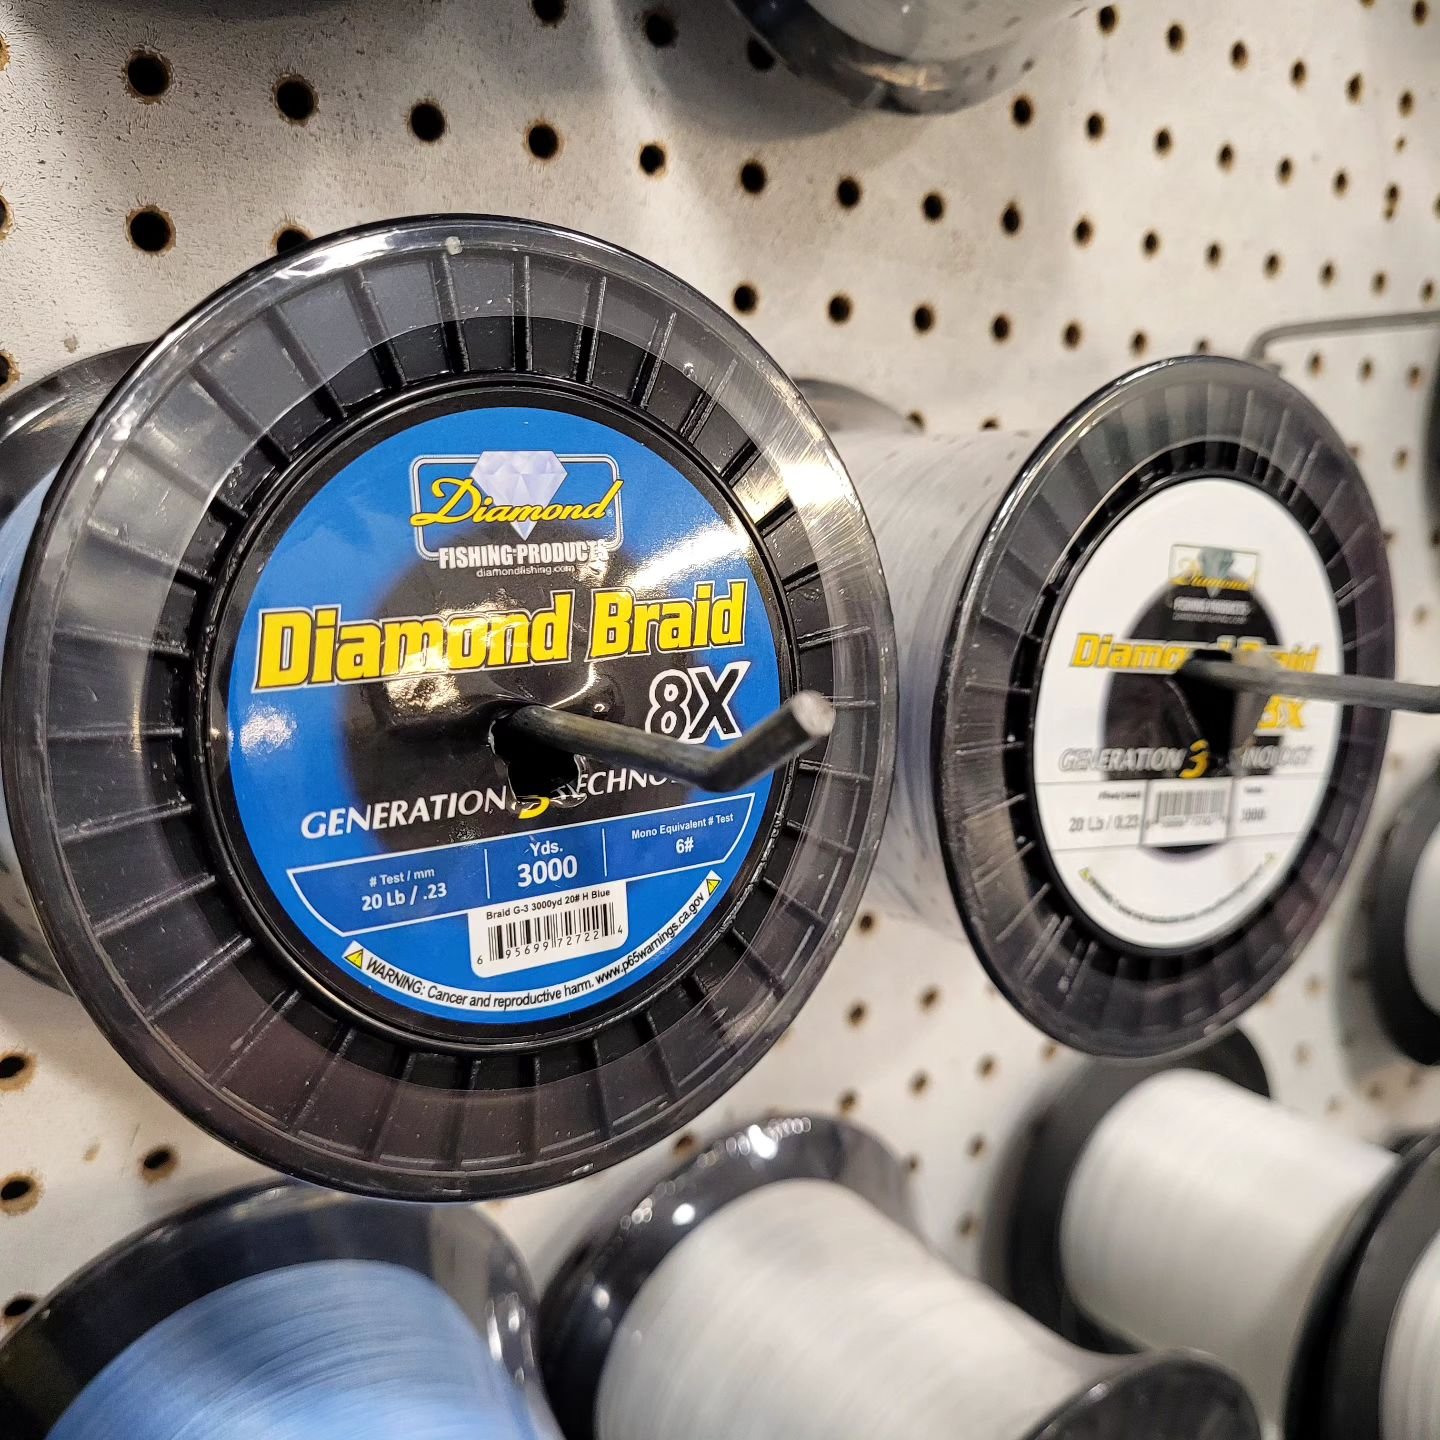 New product alert!!! ⚠️ 📢 🚨 ⚠️ 

We now stock @diamondfishingproducts Diamond 8X Braid from 10-65# in blue and white. Stop on by, and let's get you spooled up! 
.
.
.
.
.
#newproduct #fishing #diamondbraid #diamondfishingline #bettsfishingcenter #s